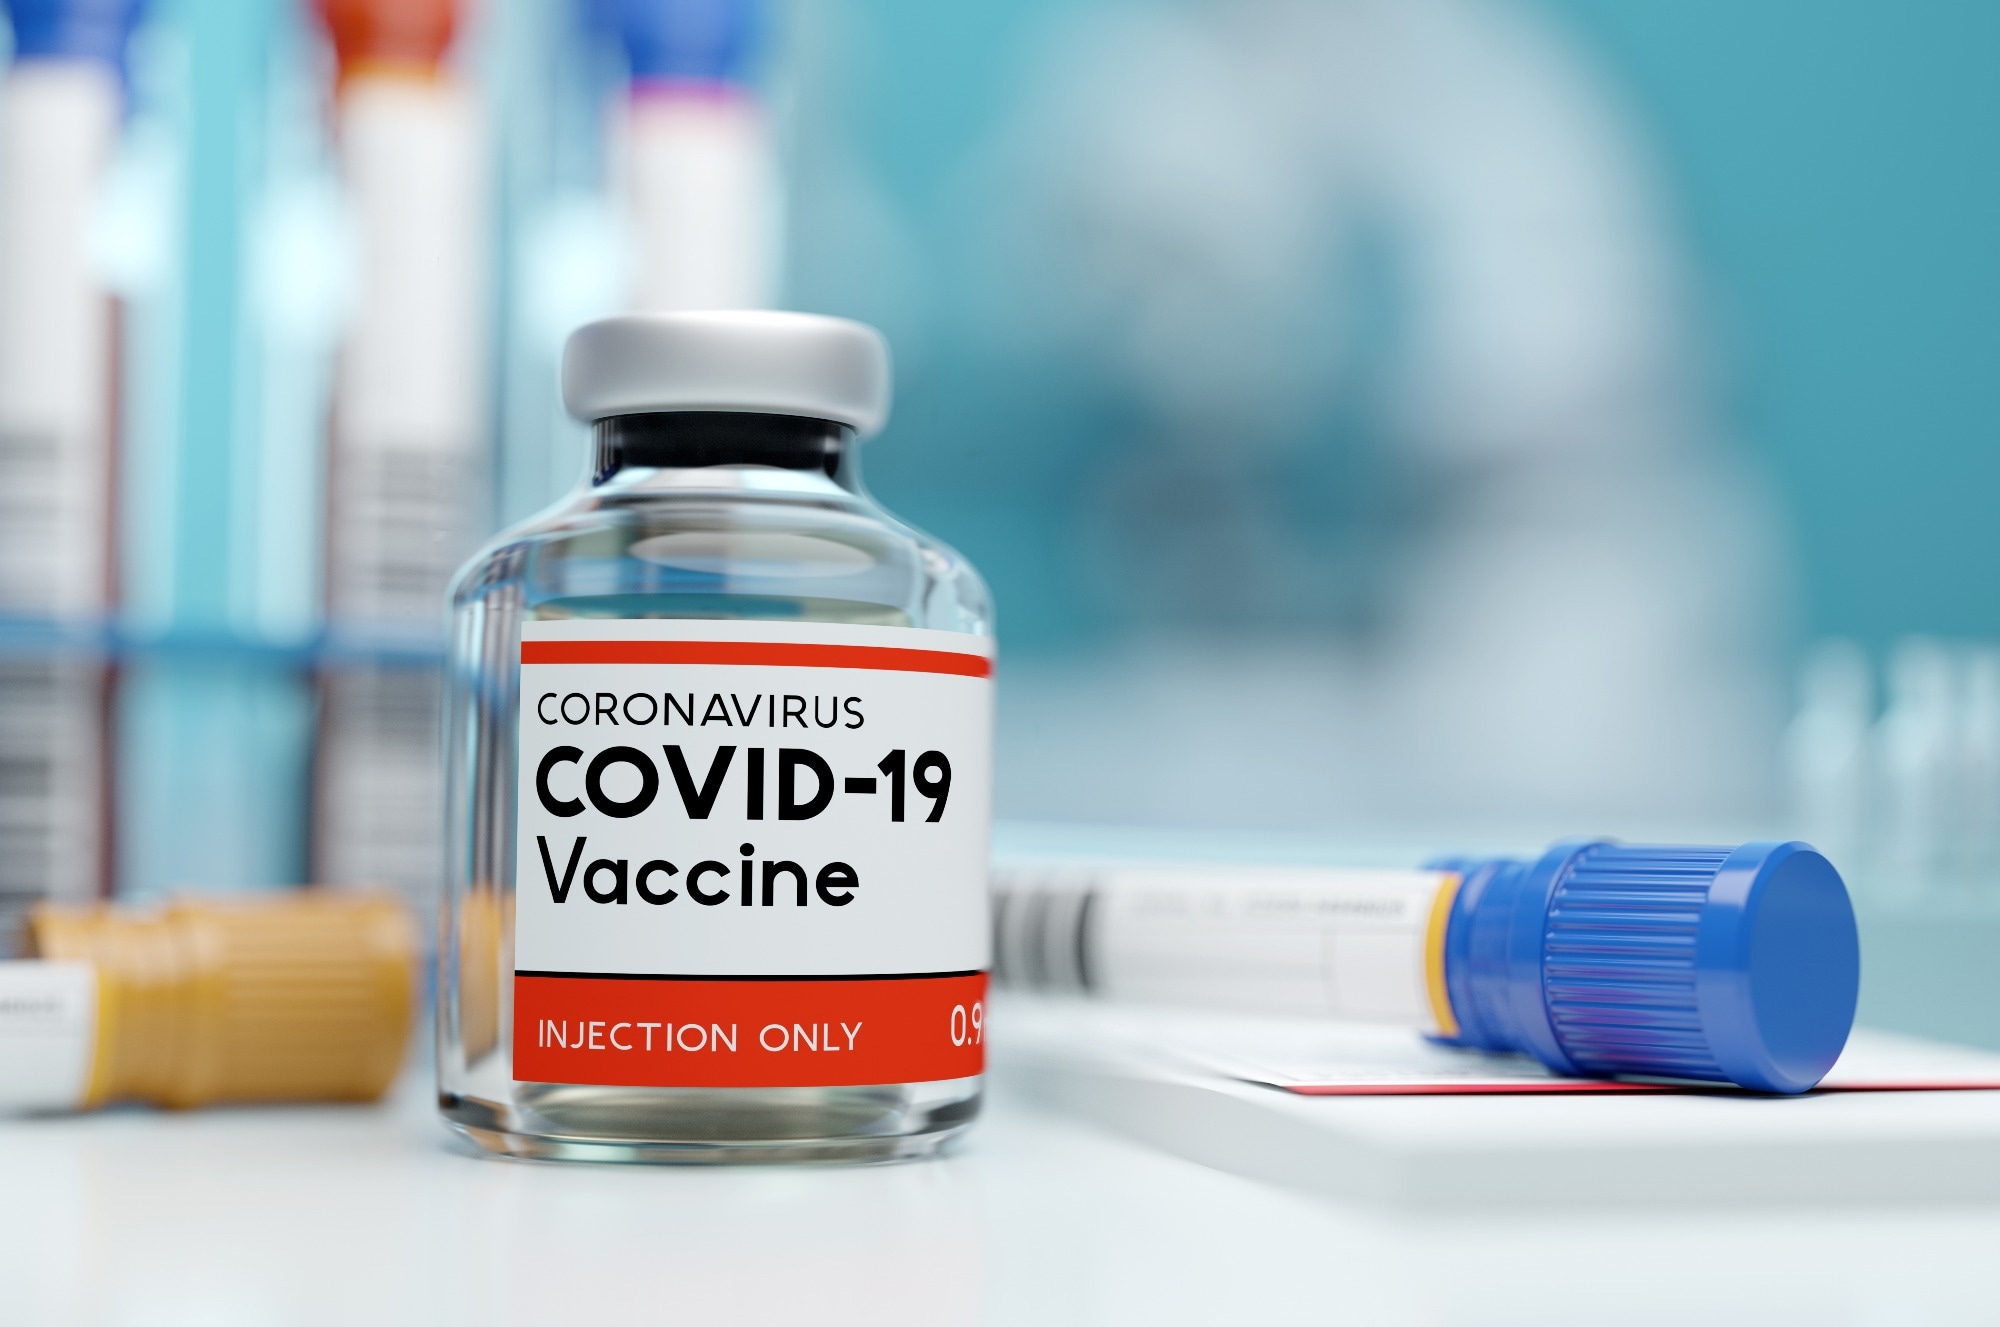 Study: Undervaccination and severe COVID-19 outcomes: meta-analysis of national cohort studies in England, Northern Ireland, Scotland, and Wales. Image Credit: solarseven/Shutterstock.com